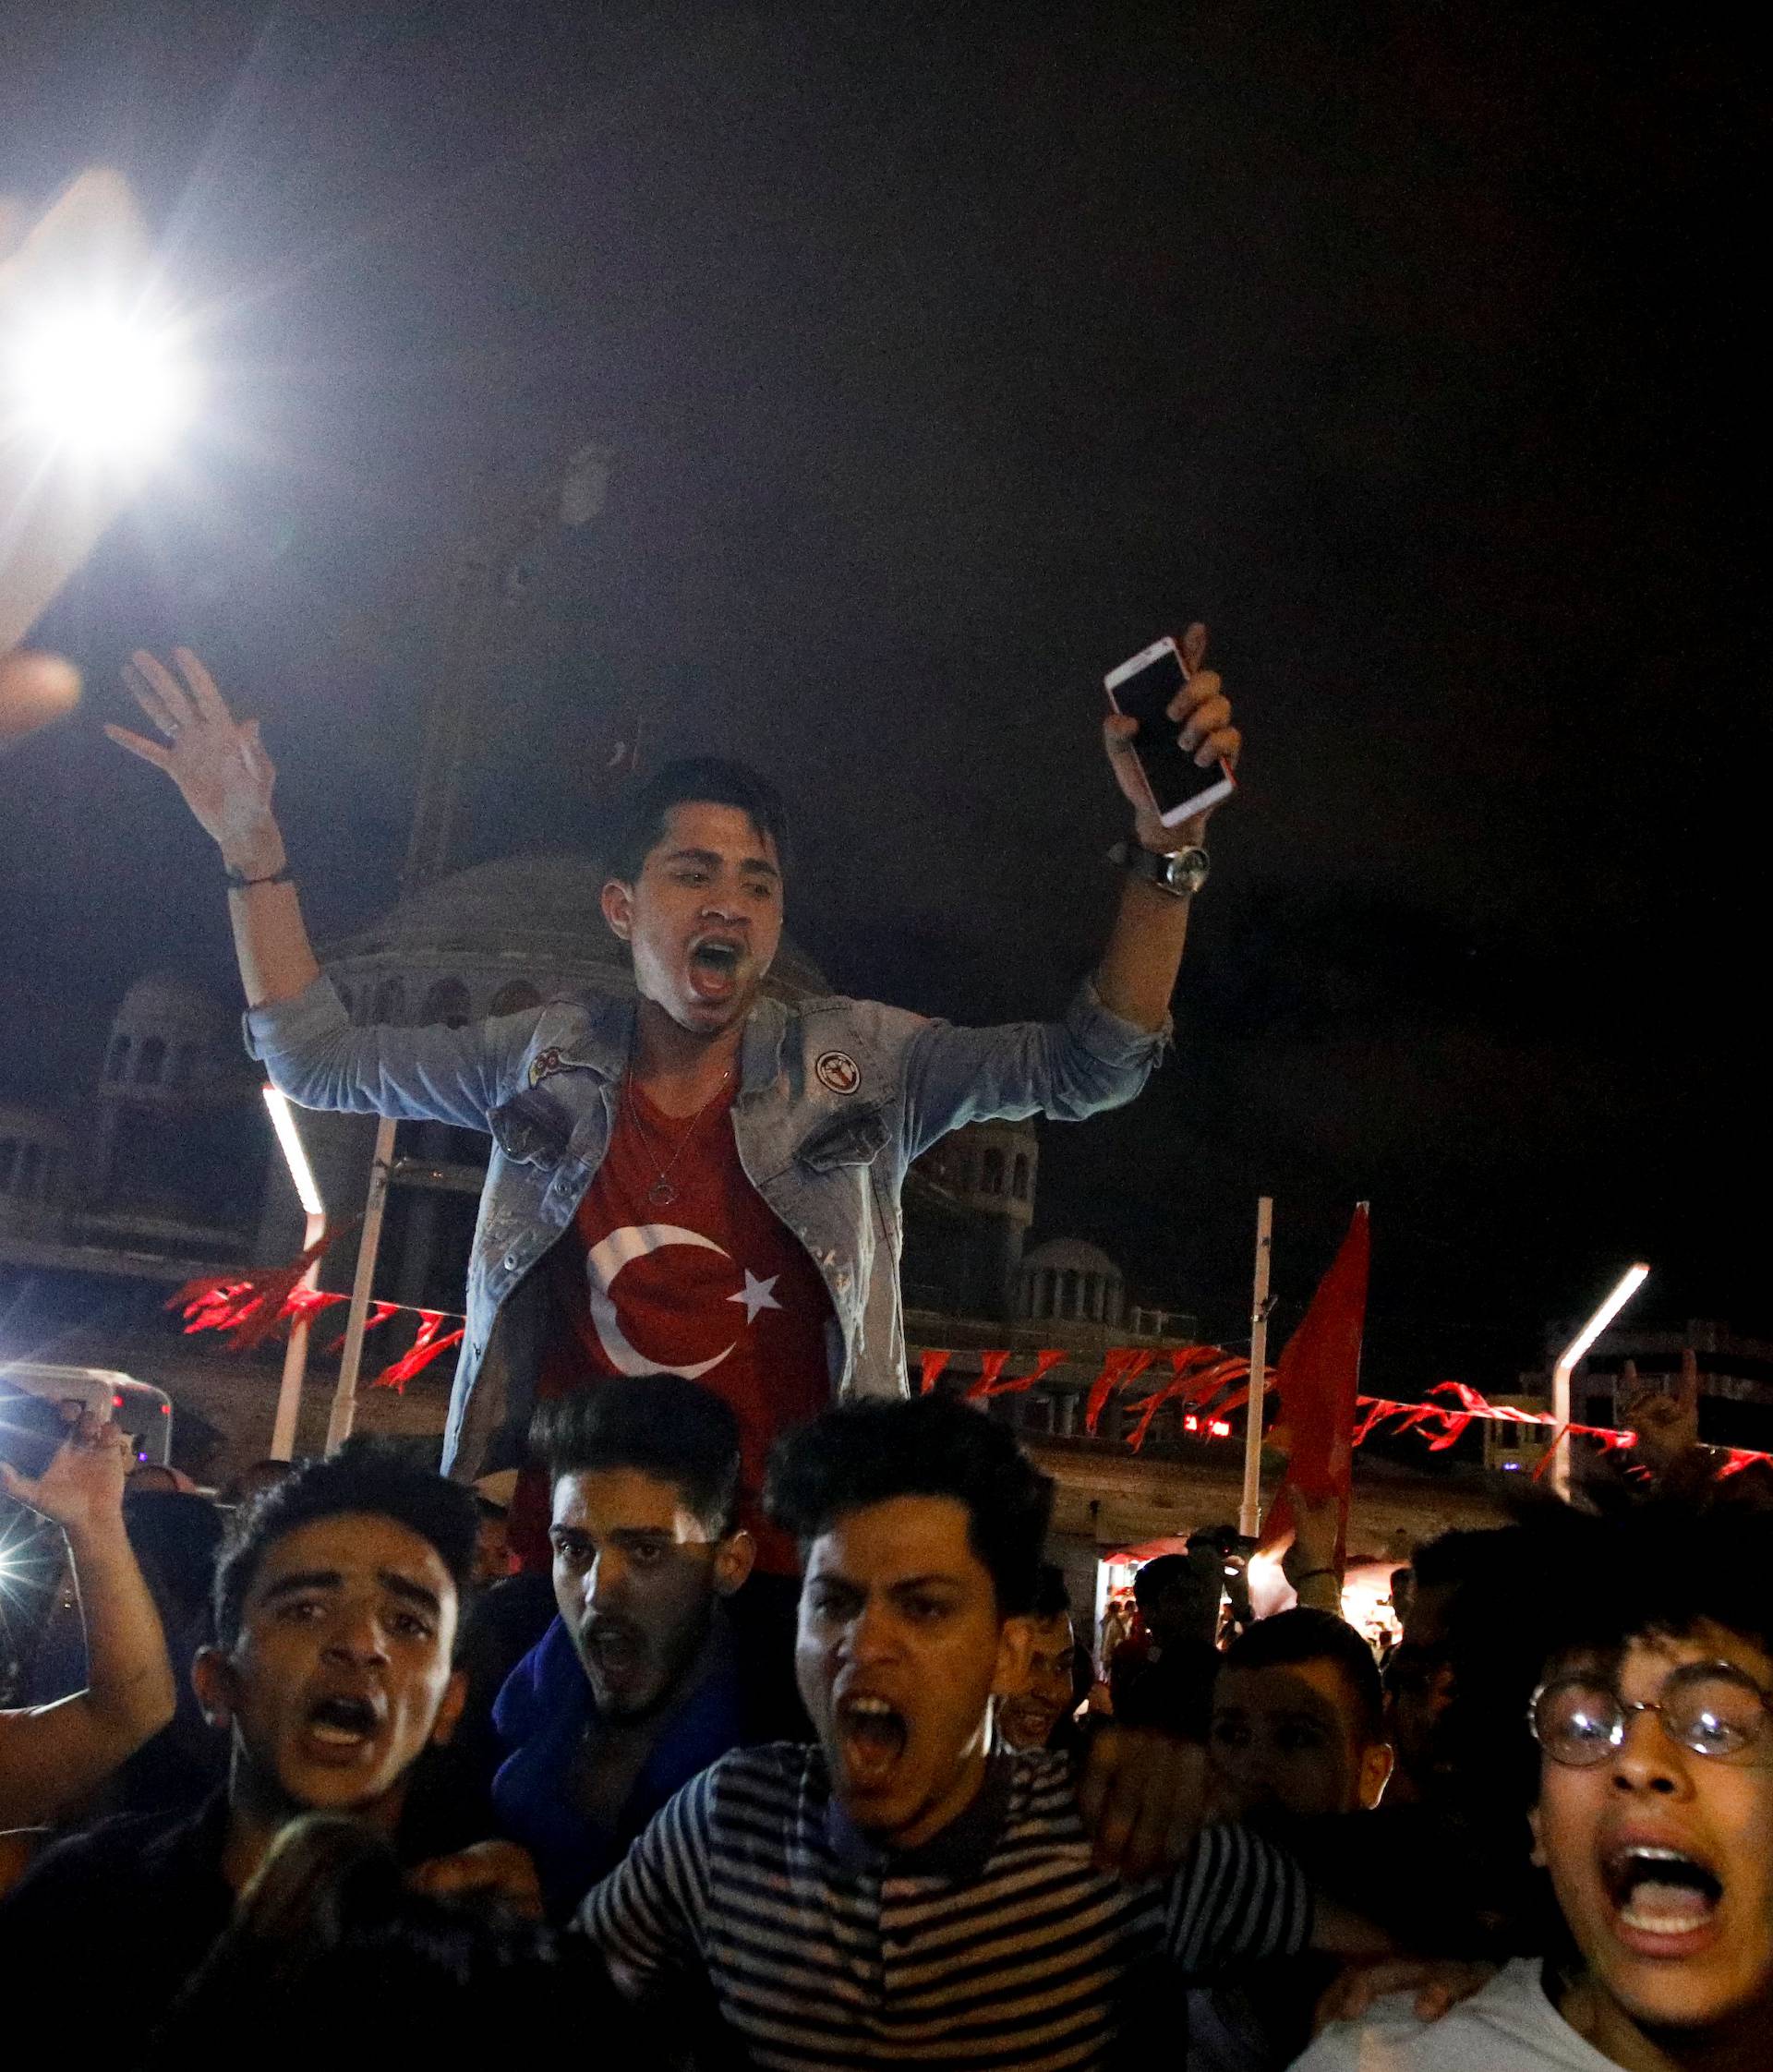 Supporters of Turkish President Tayyip Erdogan celebrate at Taksim square in Istanbul